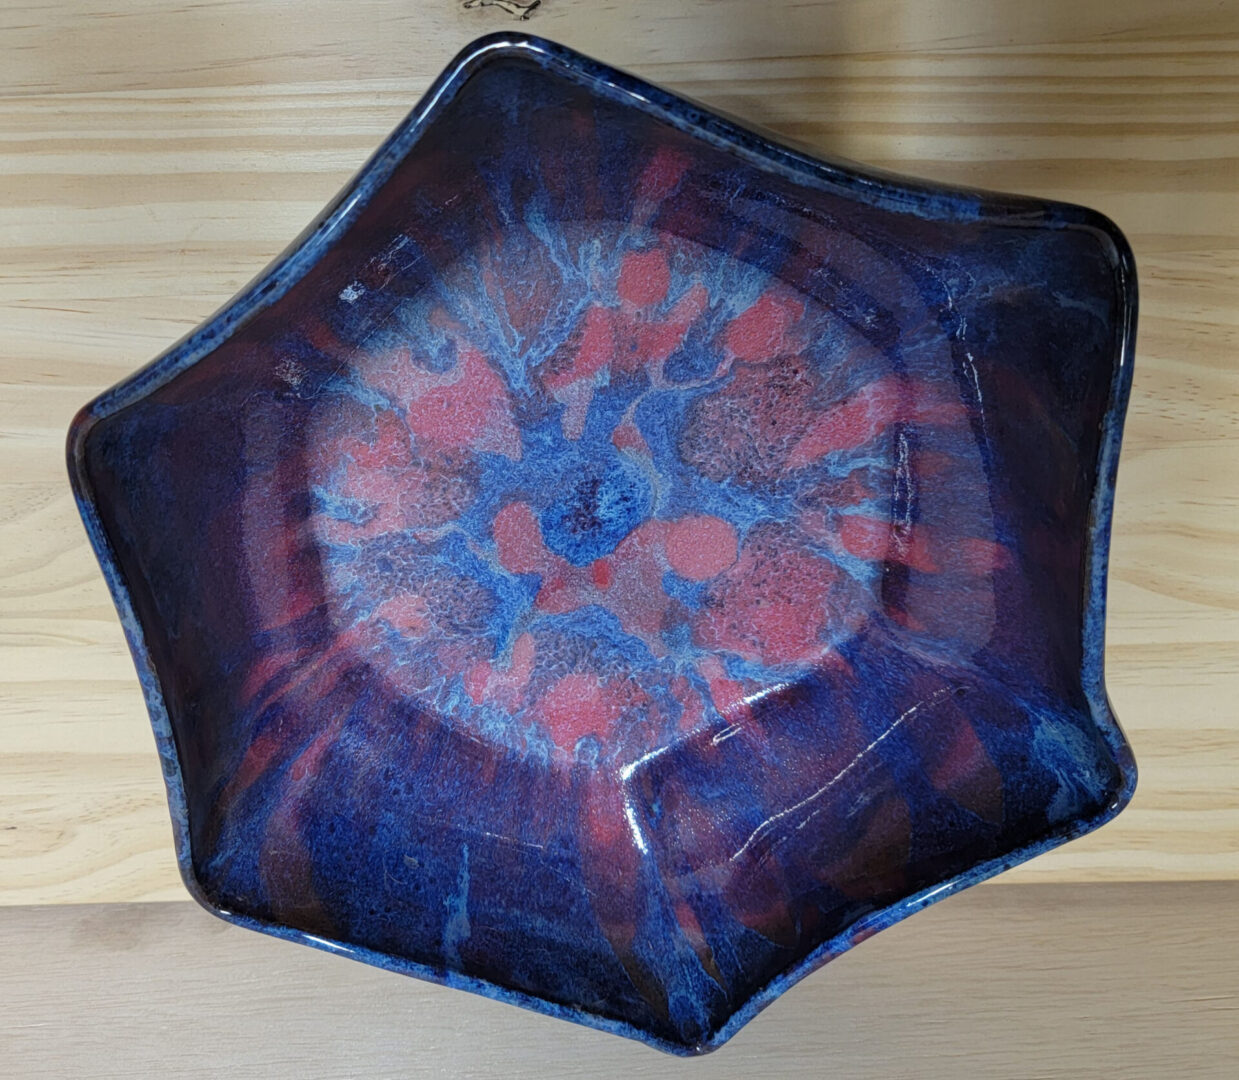 A blue bowl with red and purple design on it.